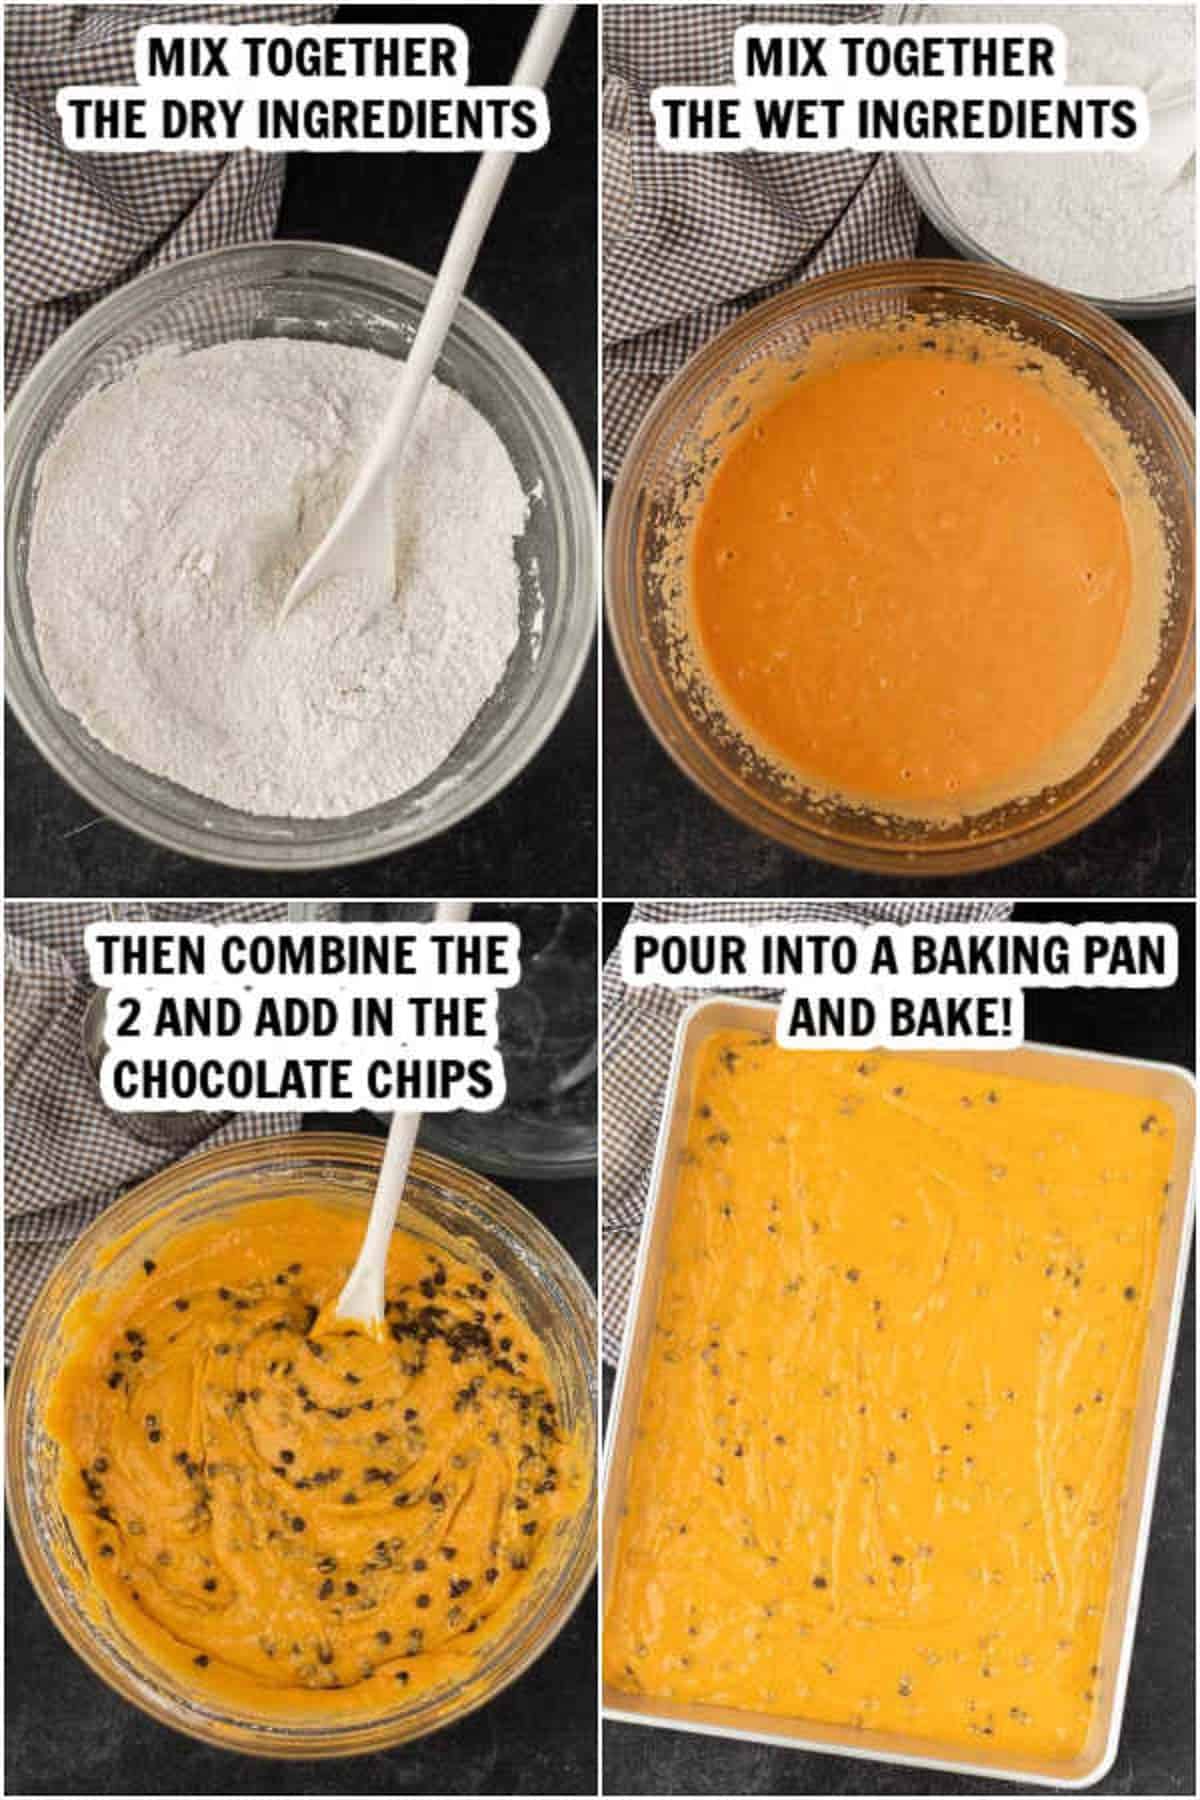 Photos showing how to make pumpkin chocolate chip bars.  The dry ingredients mixed together in a large bowl.  the wet ingredients mixed together in a separate bowl.  The dry ingredients stir into the wet ingredients, then the chocolate chips mixed in.  The mixture pulled into a baking dish and ready to bake.  